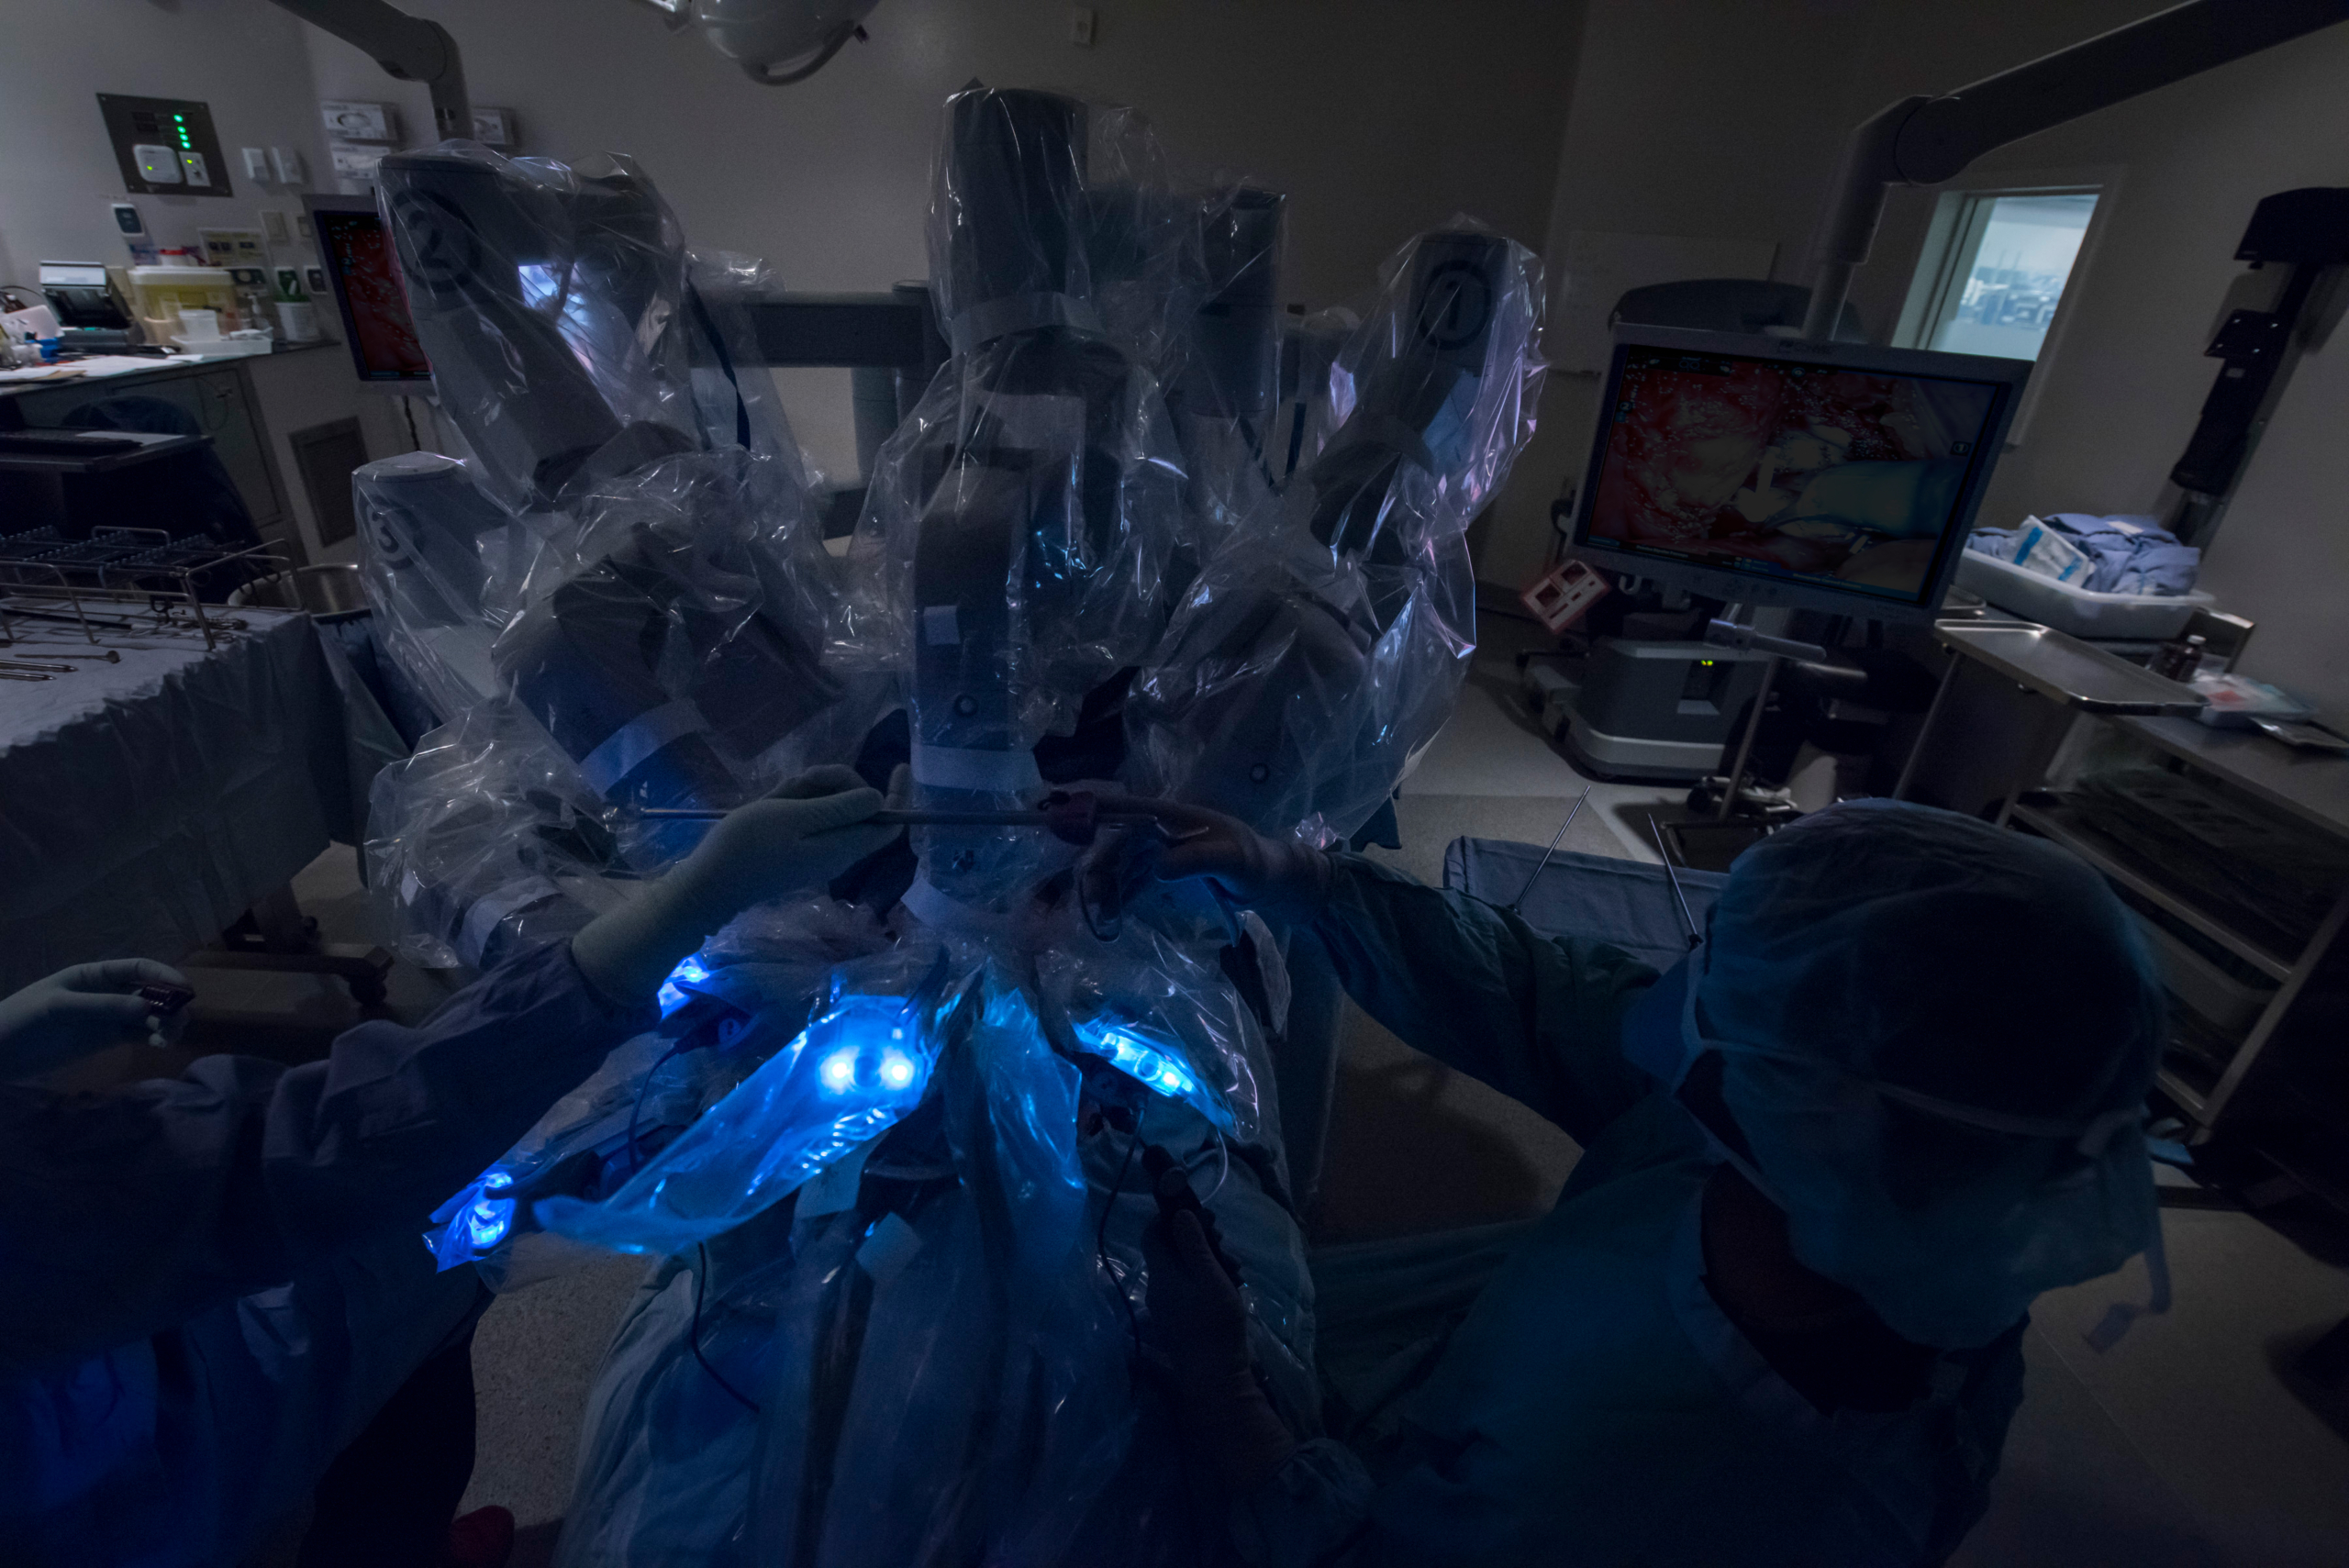 The da Vinci Surgical System is a state-of-the-art robotic system